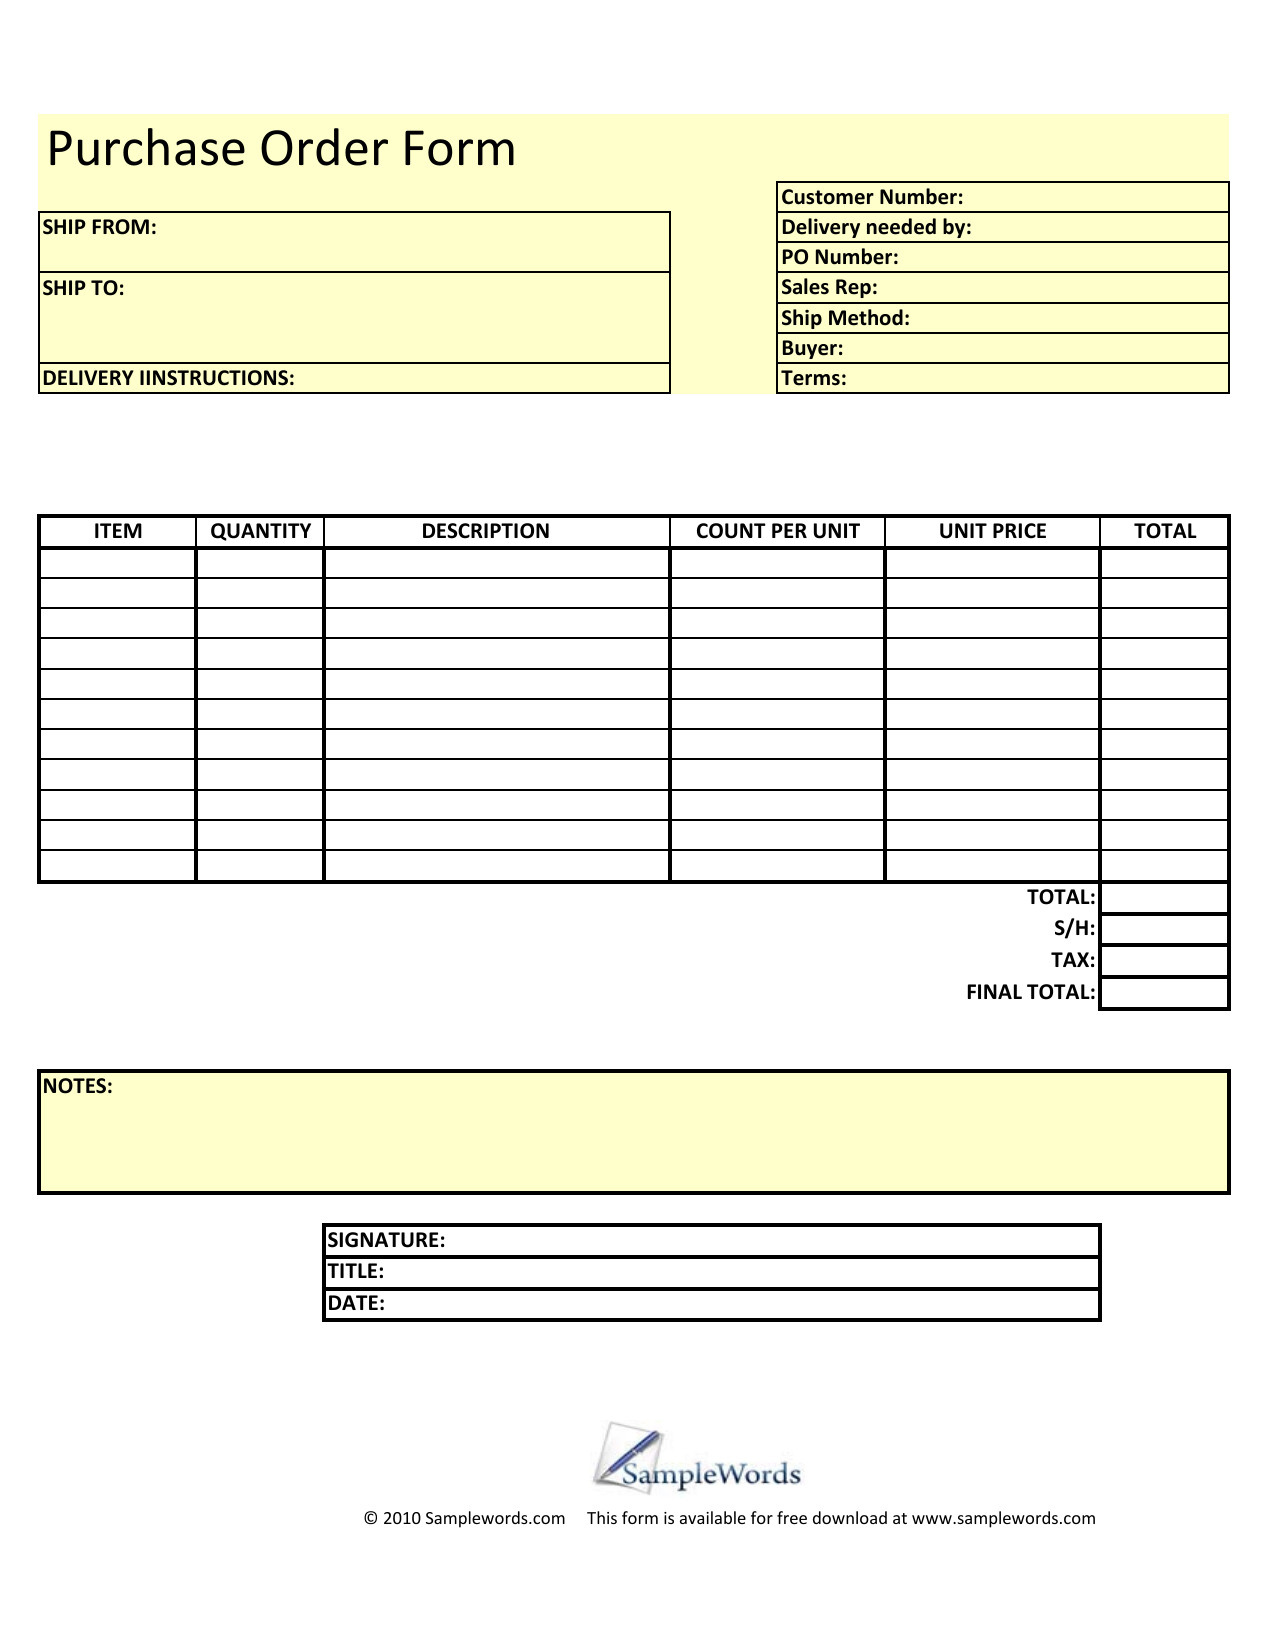 Blank order form Template Download Blank Purchase order form Template Excel